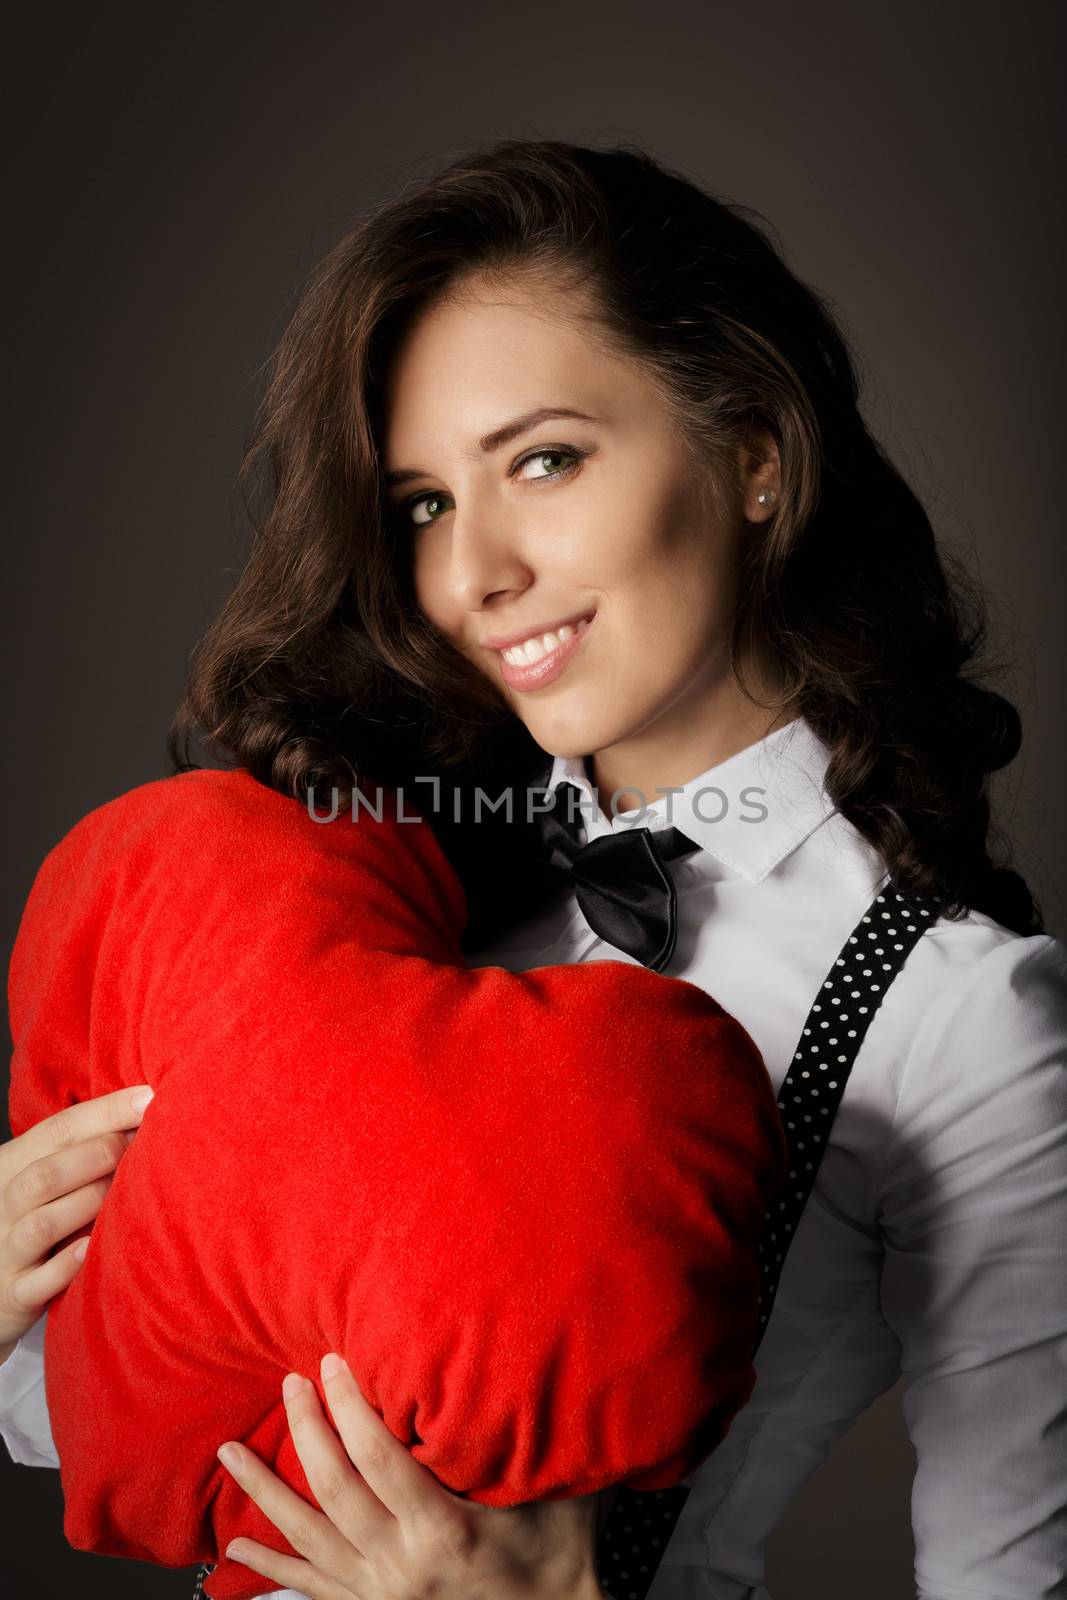 Beautiful girl holding a heart-shaped pillow in her arms.